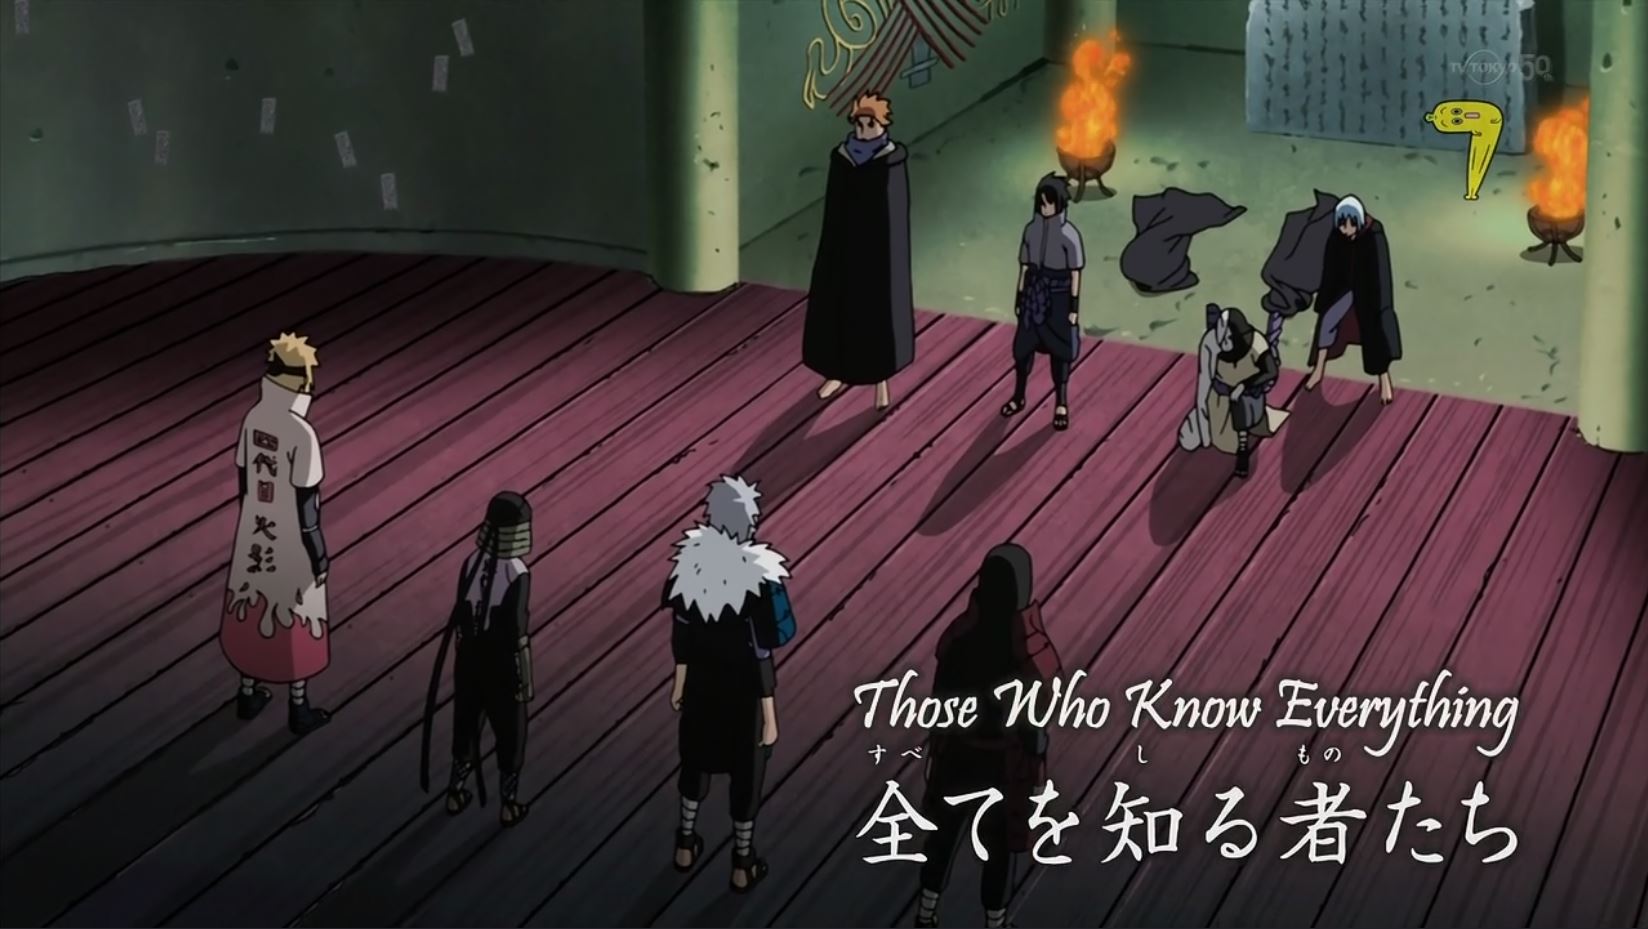 Naruto Shippuuden Episode 366 - The All-Knowing